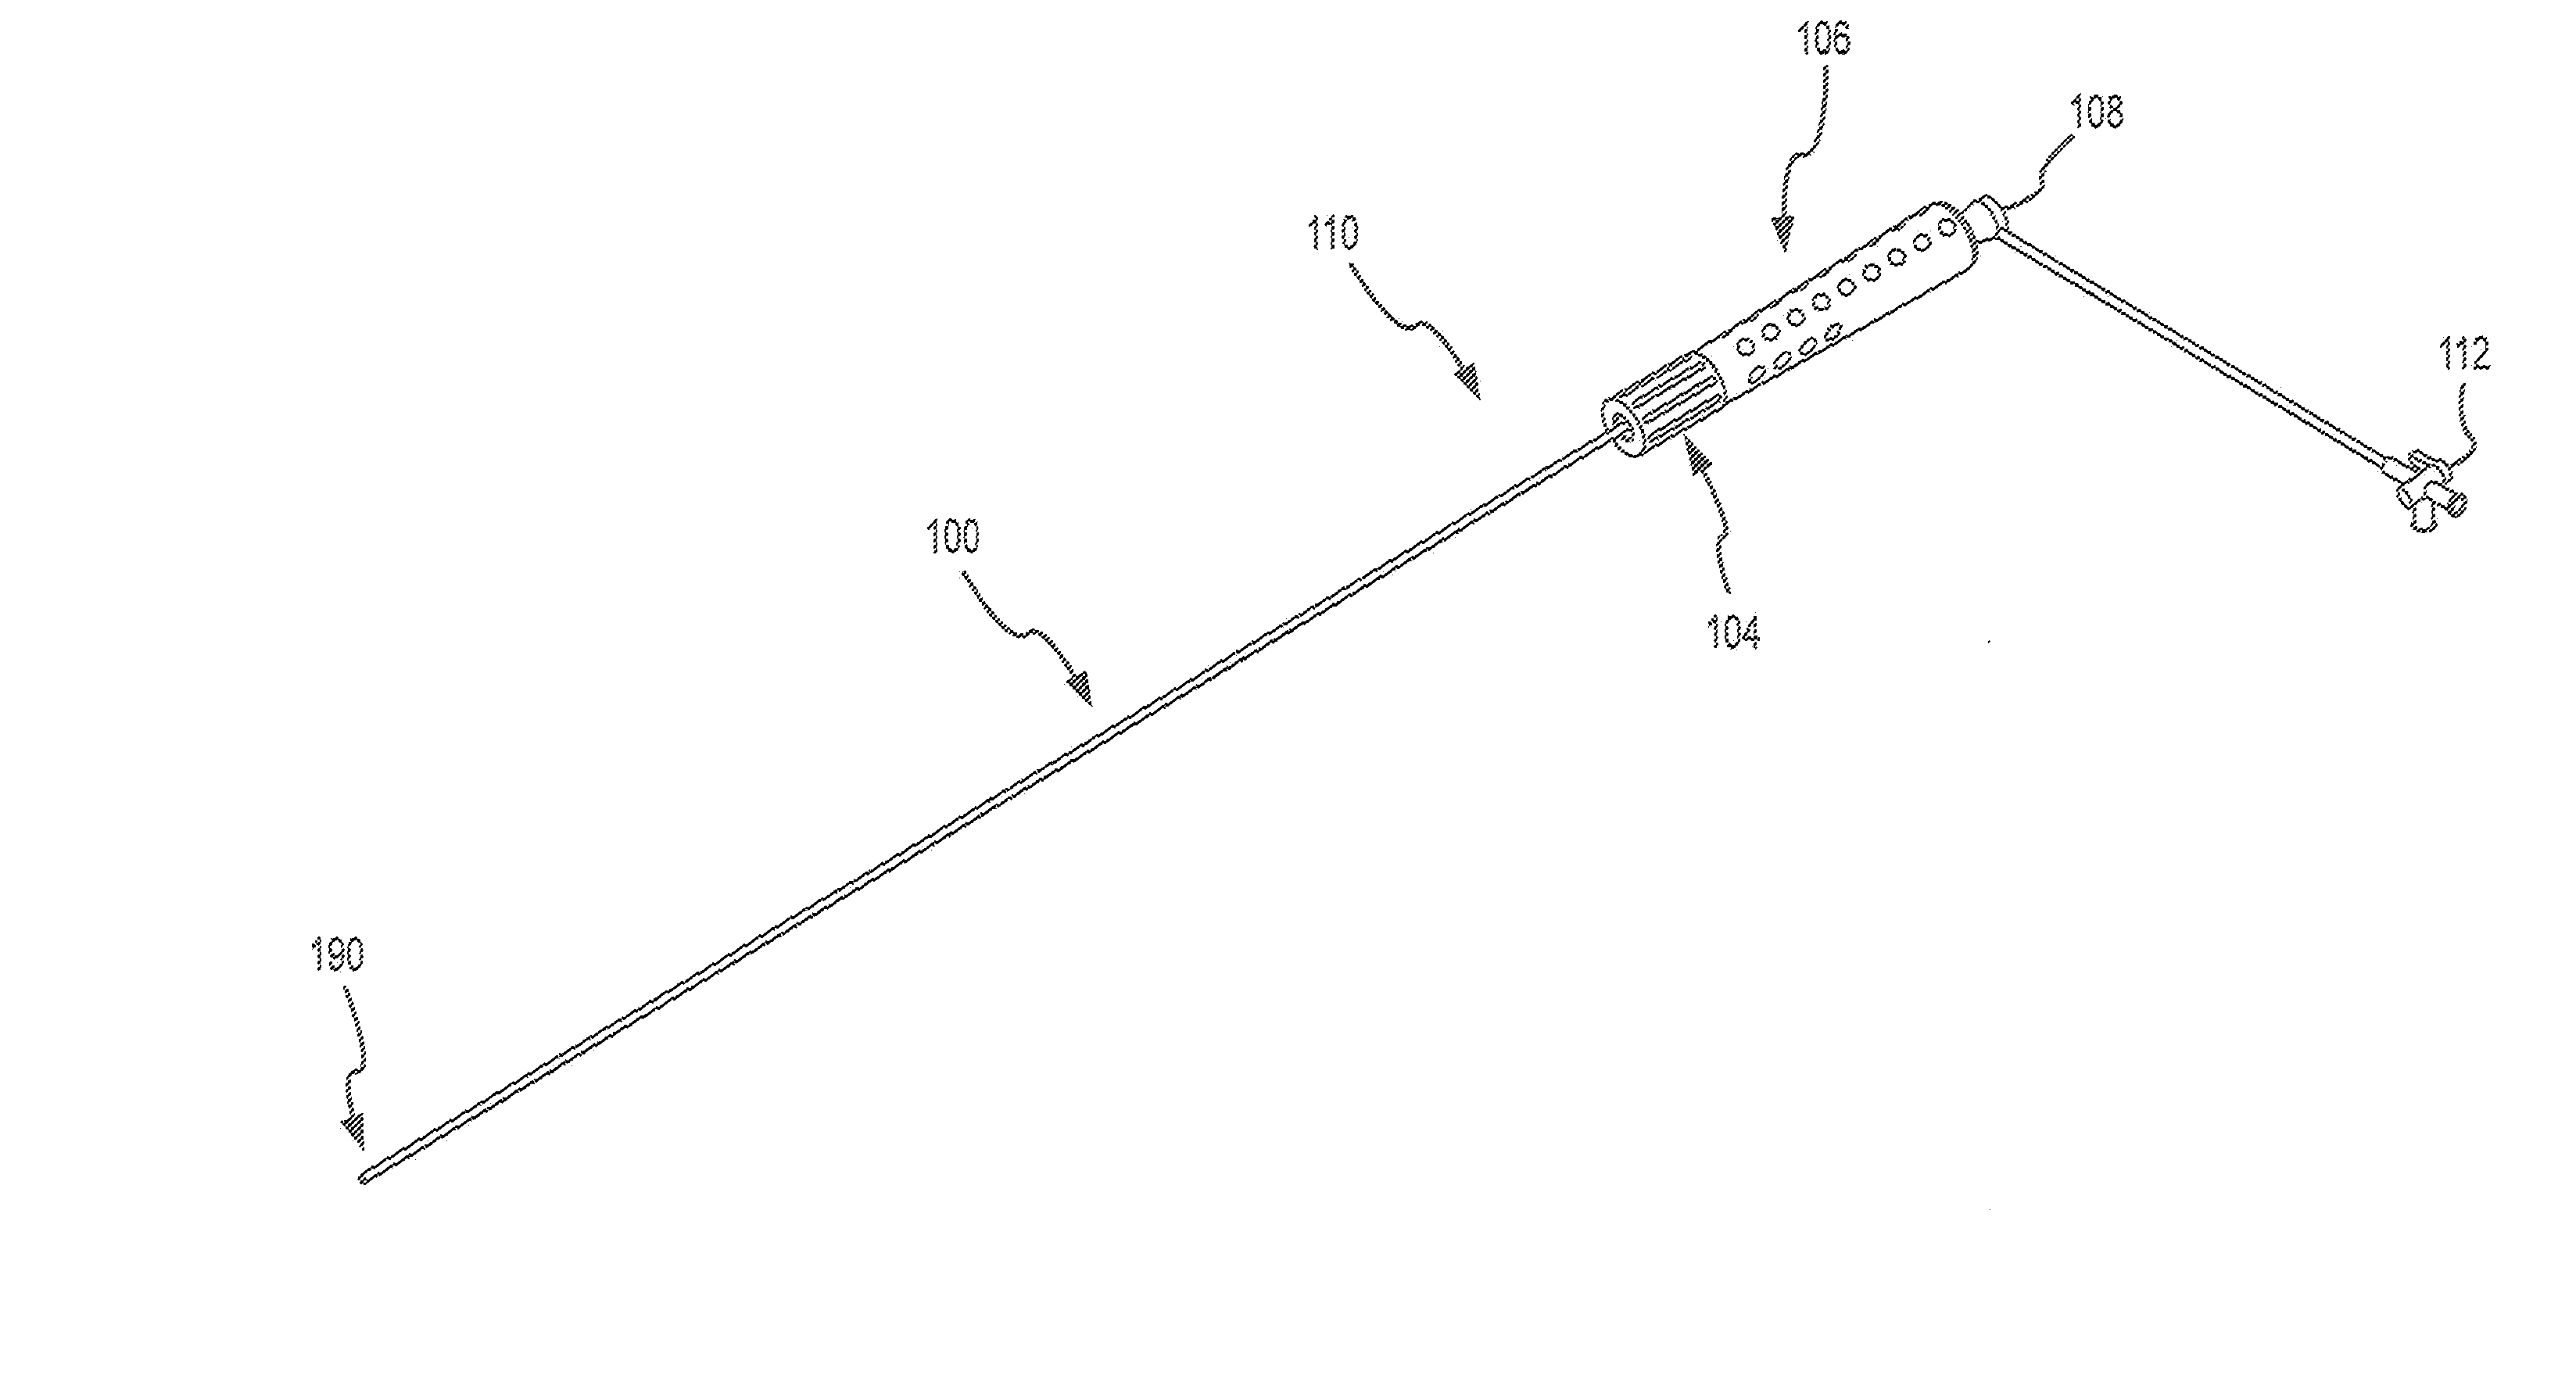 Steerable catheter using flat pull wires and having torque transfer layer made of braided flat wires